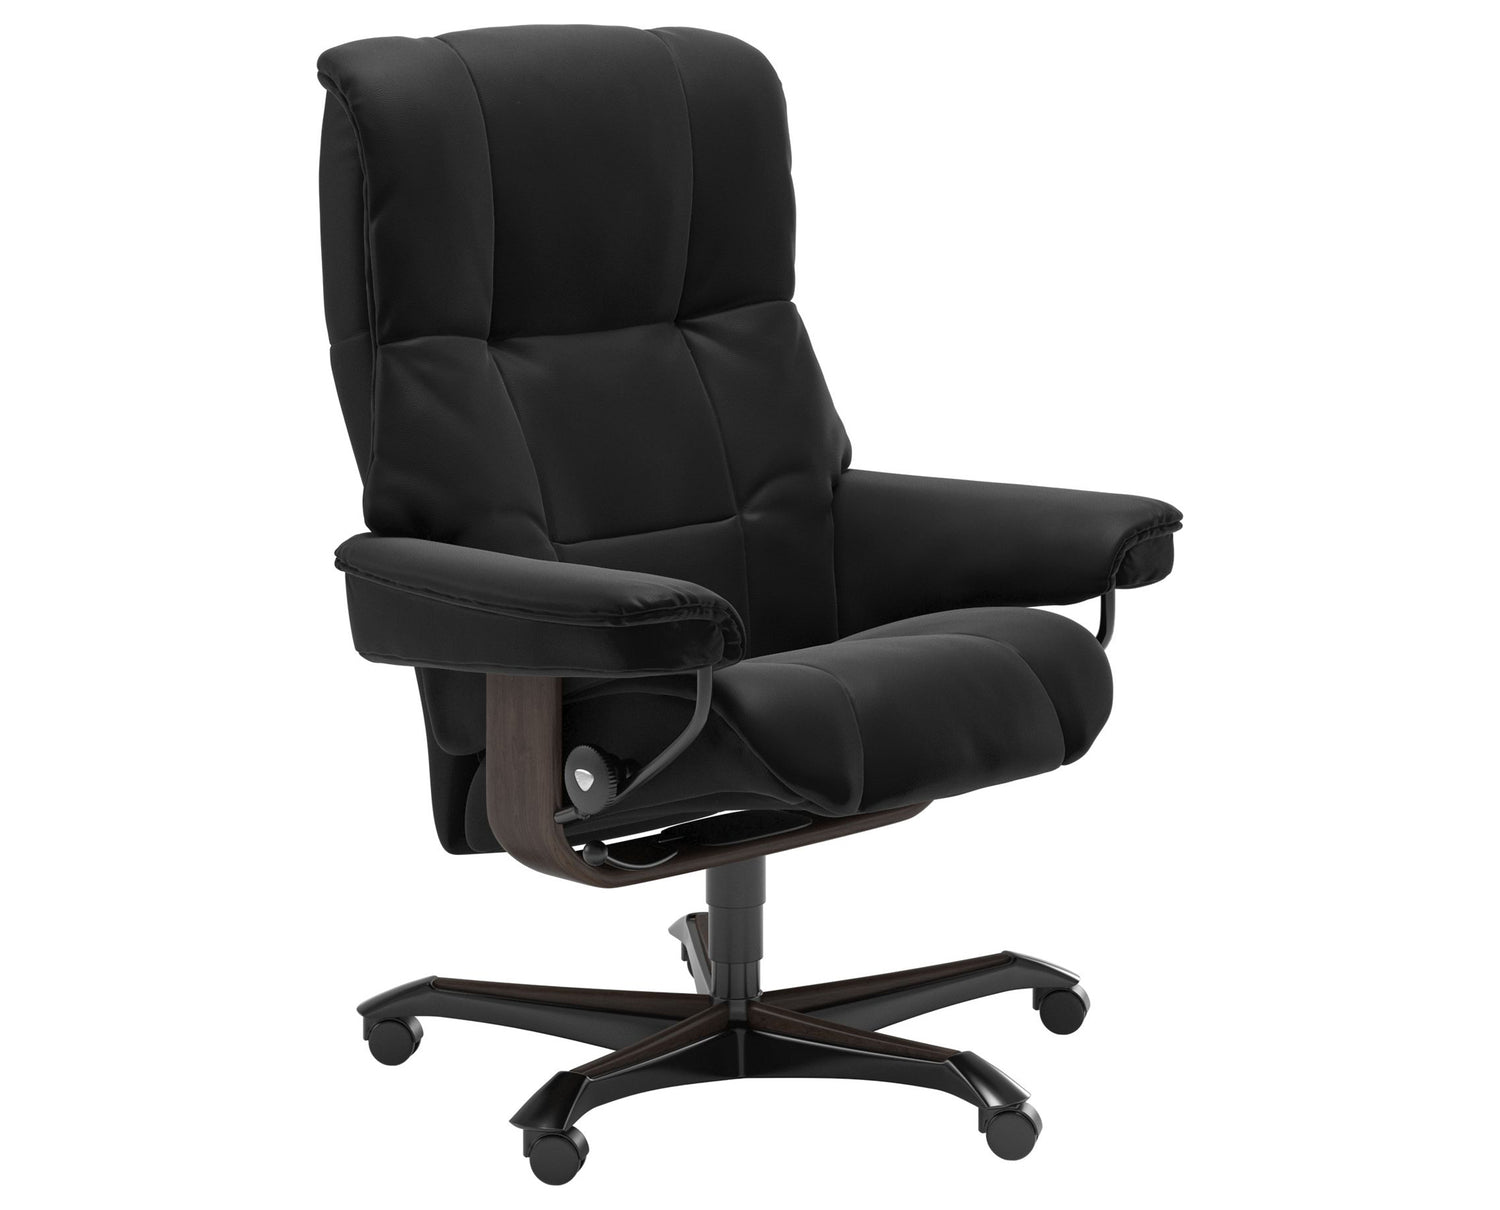 Paloma Leather Black M & Wenge Base | Stressless Mayfair Home Office Chair | Valley Ridge Furniture